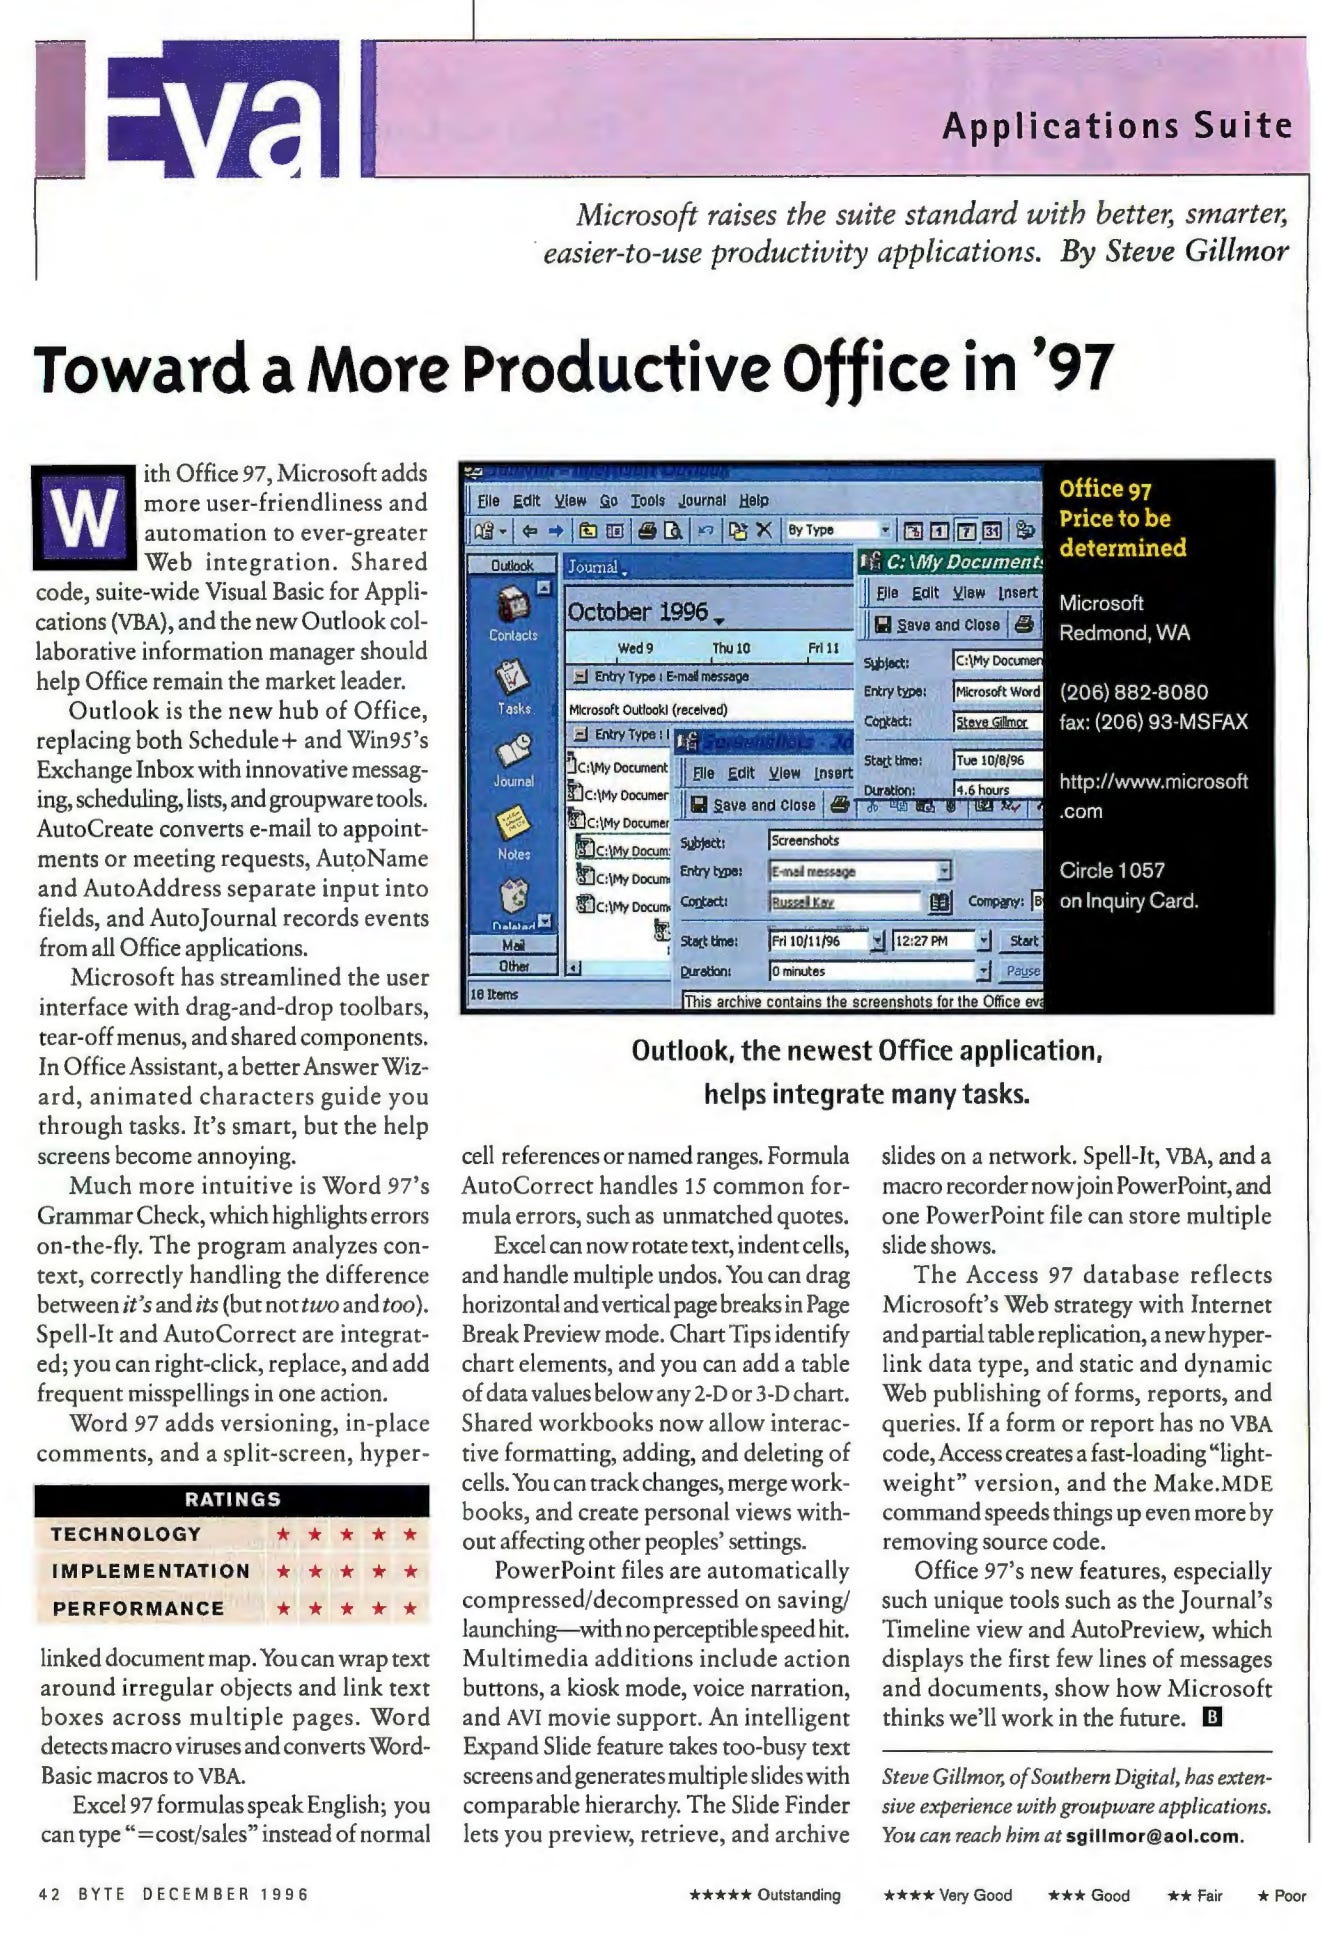 Byte Magazine review showing 5 stars across technology, implementation, performance)